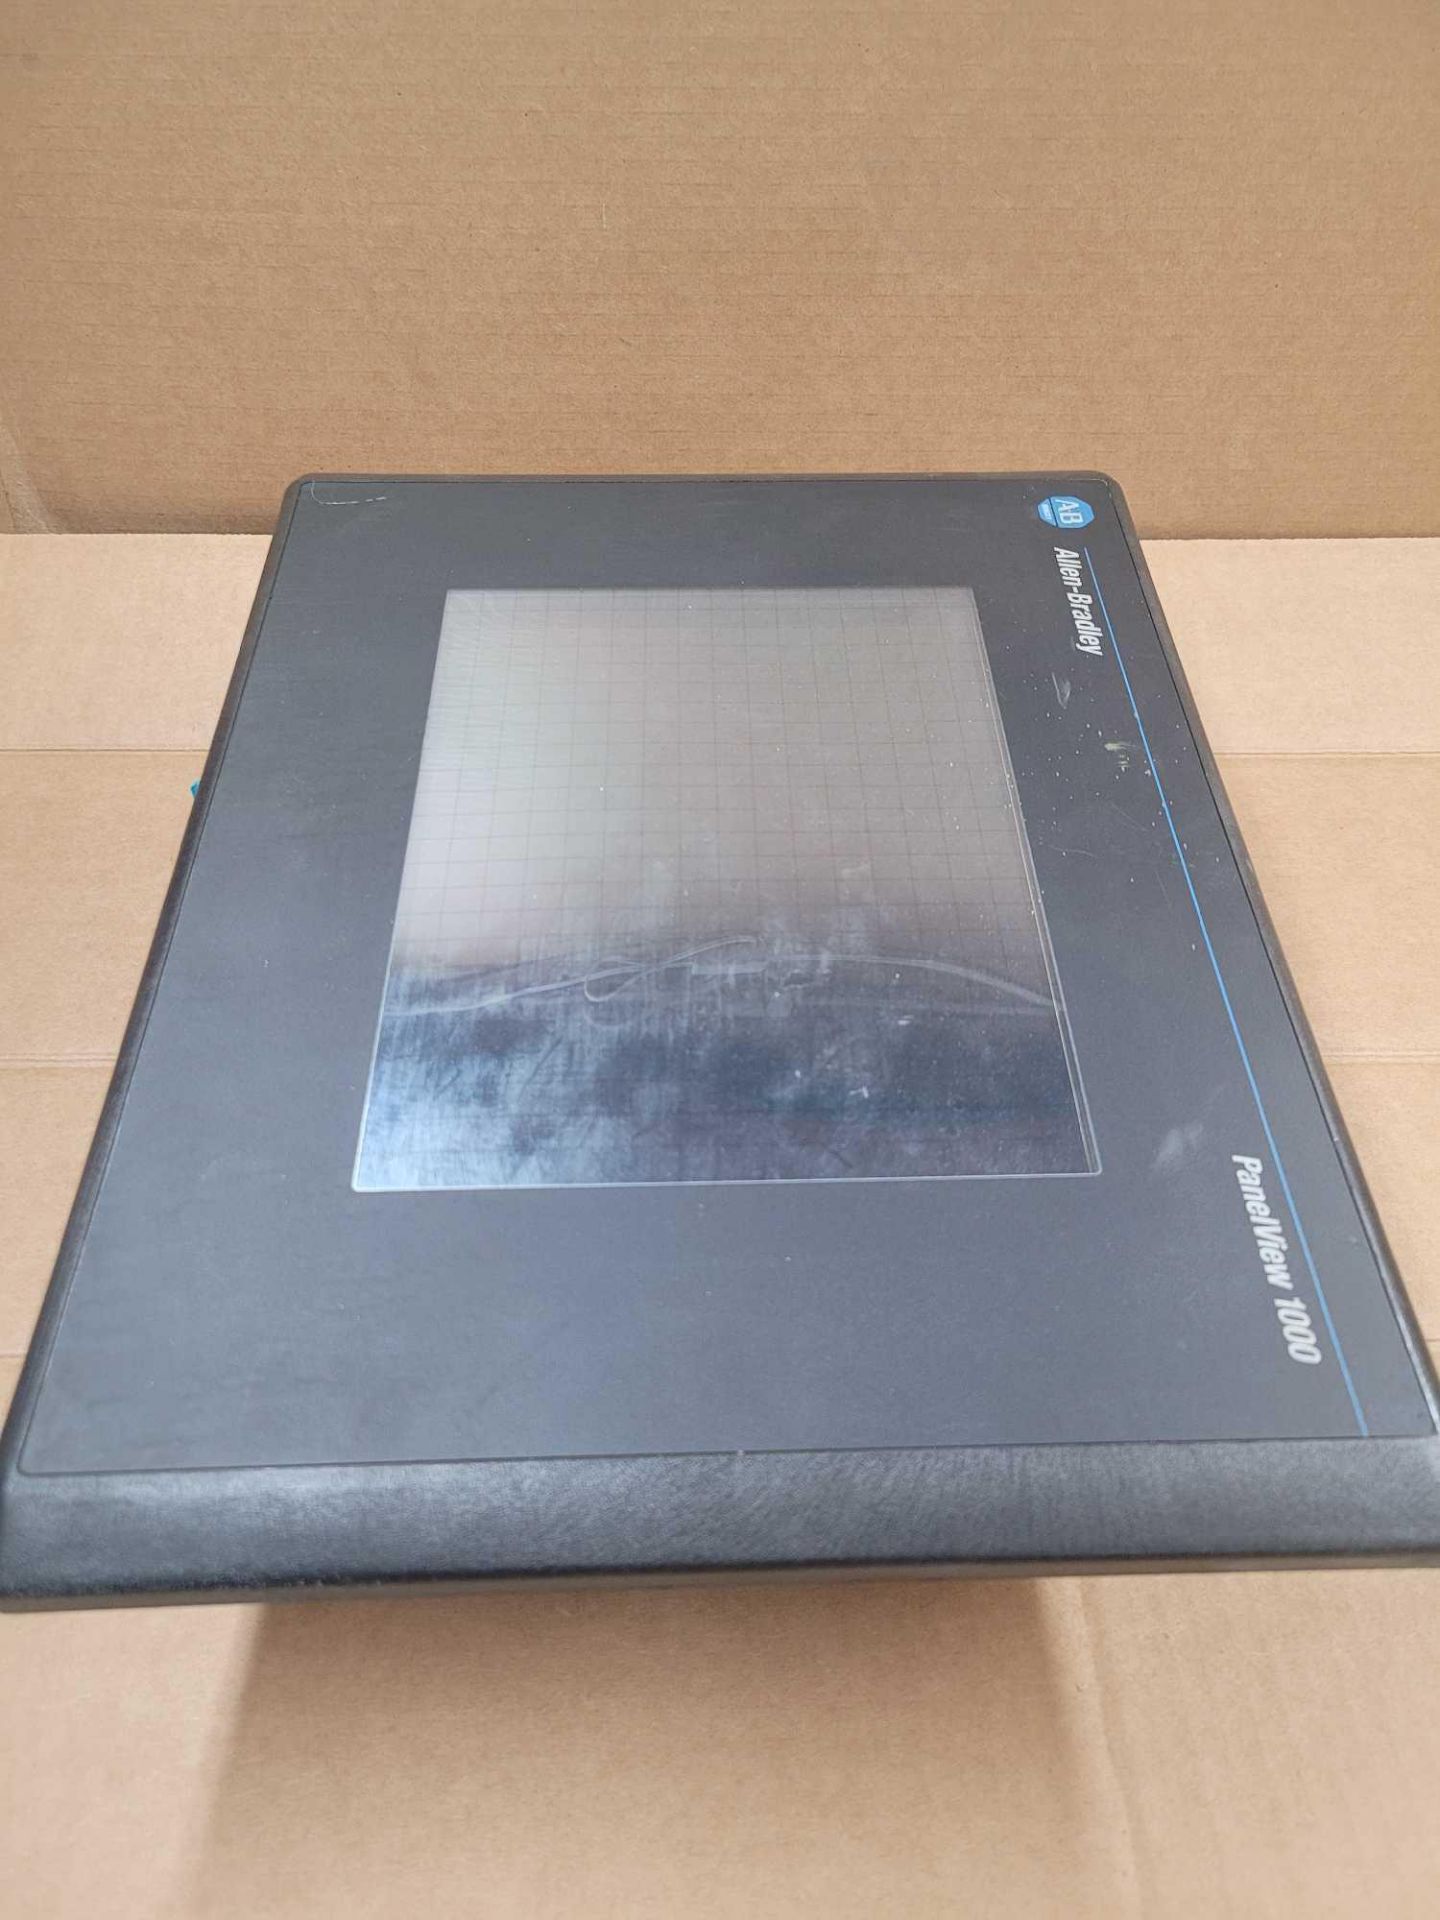 ALLEN BRADLEY 2711-T10C20 / Series D PanelView 1000 Touch Screen Operator Interface  /  Lot Weight: - Image 4 of 4